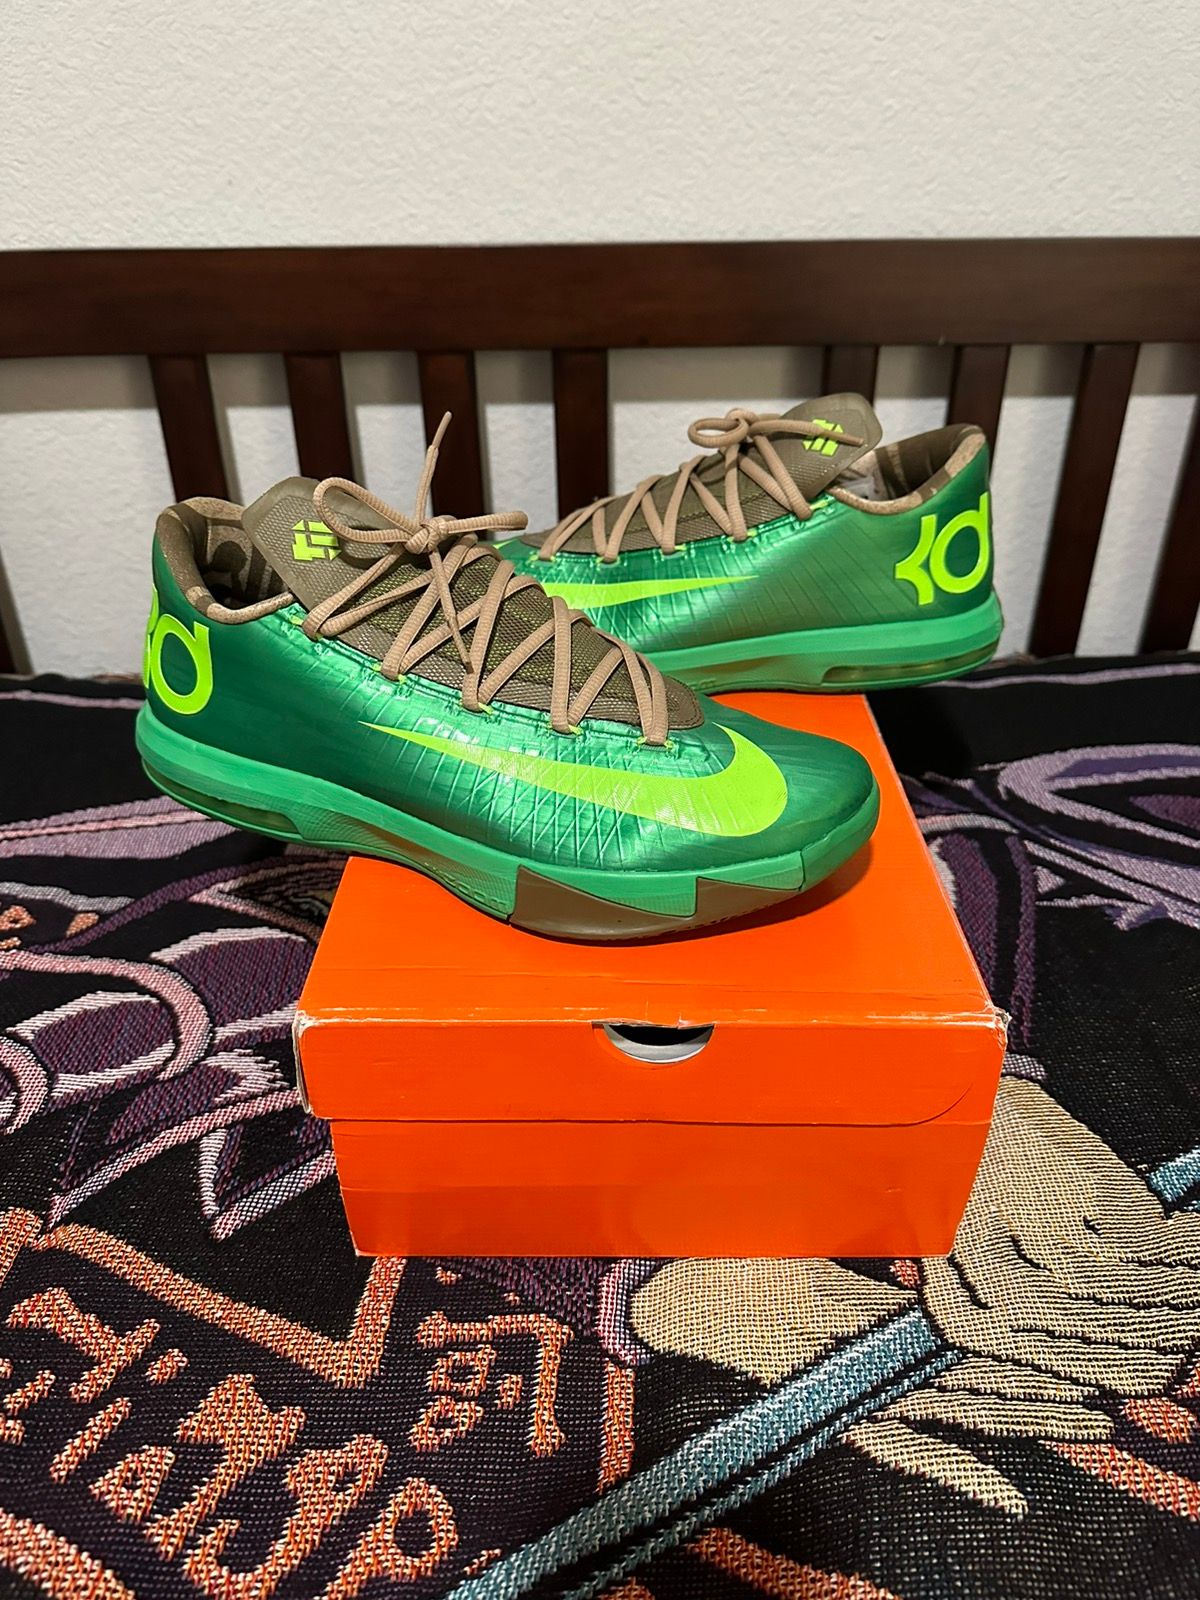 Pre-owned Nike Kd 6 Bamboo 2013 Kevin Durant Shoes In Green